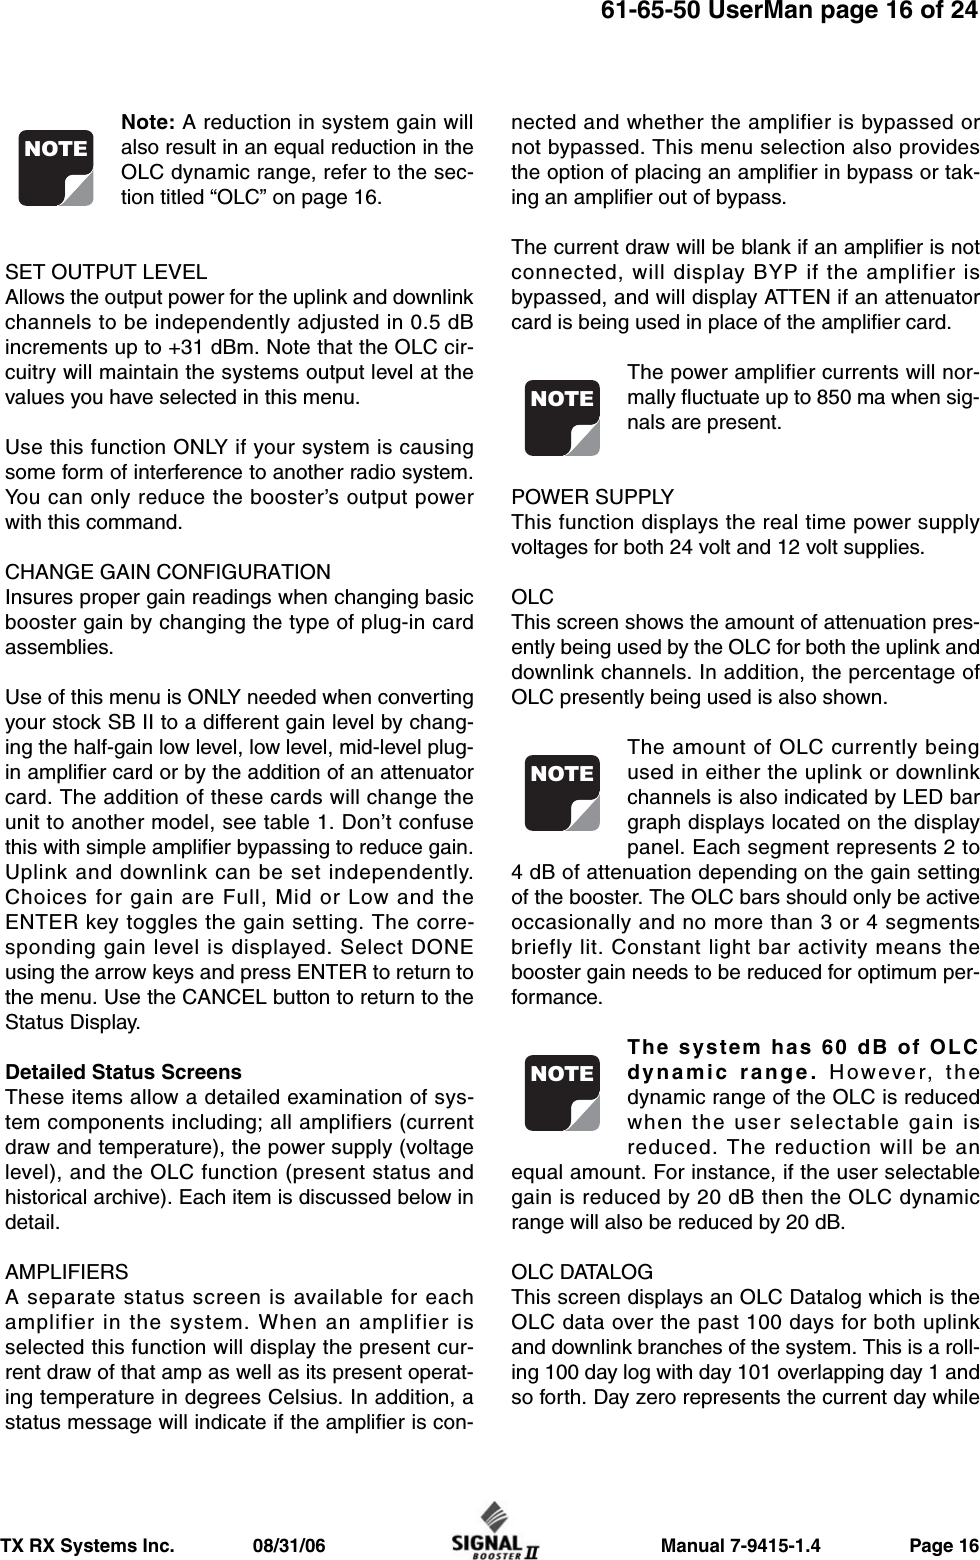                     Manual 7-9415-1.4                 Page 16TX RX Systems Inc.               08/31/0661-65-50 UserMan page 16 of 24Note: A reduction in system gain willalso result in an equal reduction in theOLC dynamic range, refer to the sec-tion titled “OLC” on page 16.SET OUTPUT LEVELAllows the output power for the uplink and downlinkchannels to be independently adjusted in 0.5 dBincrements up to +31 dBm. Note that the OLC cir-cuitry will maintain the systems output level at thevalues you have selected in this menu.Use this function ONLY if your system is causingsome form of interference to another radio system.You can only reduce the booster’s output powerwith this command.CHANGE GAIN CONFIGURATIONInsures proper gain readings when changing basicbooster gain by changing the type of plug-in cardassemblies.Use of this menu is ONLY needed when convertingyour stock SB II to a different gain level by chang-ing the half-gain low level, low level, mid-level plug-in amplifier card or by the addition of an attenuatorcard. The addition of these cards will change theunit to another model, see table 1. Don’t confusethis with simple amplifier bypassing to reduce gain.Uplink and downlink can be set independently.Choices for gain are Full, Mid or Low and theENTER key toggles the gain setting. The corre-sponding gain level is displayed. Select DONEusing the arrow keys and press ENTER to return tothe menu. Use the CANCEL button to return to theStatus Display.Detailed Status ScreensThese items allow a detailed examination of sys-tem components including; all amplifiers (currentdraw and temperature), the power supply (voltagelevel), and the OLC function (present status andhistorical archive). Each item is discussed below indetail.AMPLIFIERSA separate status screen is available for eachamplifier in the system. When an amplifier isselected this function will display the present cur-rent draw of that amp as well as its present operat-ing temperature in degrees Celsius. In addition, astatus message will indicate if the amplifier is con-nected and whether the amplifier is bypassed ornot bypassed. This menu selection also providesthe option of placing an amplifier in bypass or tak-ing an amplifier out of bypass.The current draw will be blank if an amplifier is notconnected, will display BYP if the amplifier isbypassed, and will display ATTEN if an attenuatorcard is being used in place of the amplifier card.The power amplifier currents will nor-mally fluctuate up to 850 ma when sig-nals are present.POWER SUPPLYThis function displays the real time power supplyvoltages for both 24 volt and 12 volt supplies.OLCThis screen shows the amount of attenuation pres-ently being used by the OLC for both the uplink anddownlink channels. In addition, the percentage ofOLC presently being used is also shown.The amount of OLC currently beingused in either the uplink or downlinkchannels is also indicated by LED bargraph displays located on the displaypanel. Each segment represents 2 to4 dB of attenuation depending on the gain settingof the booster. The OLC bars should only be activeoccasionally and no more than 3 or 4 segmentsbriefly lit. Constant light bar activity means thebooster gain needs to be reduced for optimum per-formance.The system has 60 dB of OLCdynamic range. However, thedynamic range of the OLC is reducedwhen the user selectable gain isreduced. The reduction will be anequal amount. For instance, if the user selectablegain is reduced by 20 dB then the OLC dynamicrange will also be reduced by 20 dB.OLC DATALOGThis screen displays an OLC Datalog which is theOLC data over the past 100 days for both uplinkand downlink branches of the system. This is a roll-ing 100 day log with day 101 overlapping day 1 andso forth. Day zero represents the current day whileNOTENOTENOTENOTE